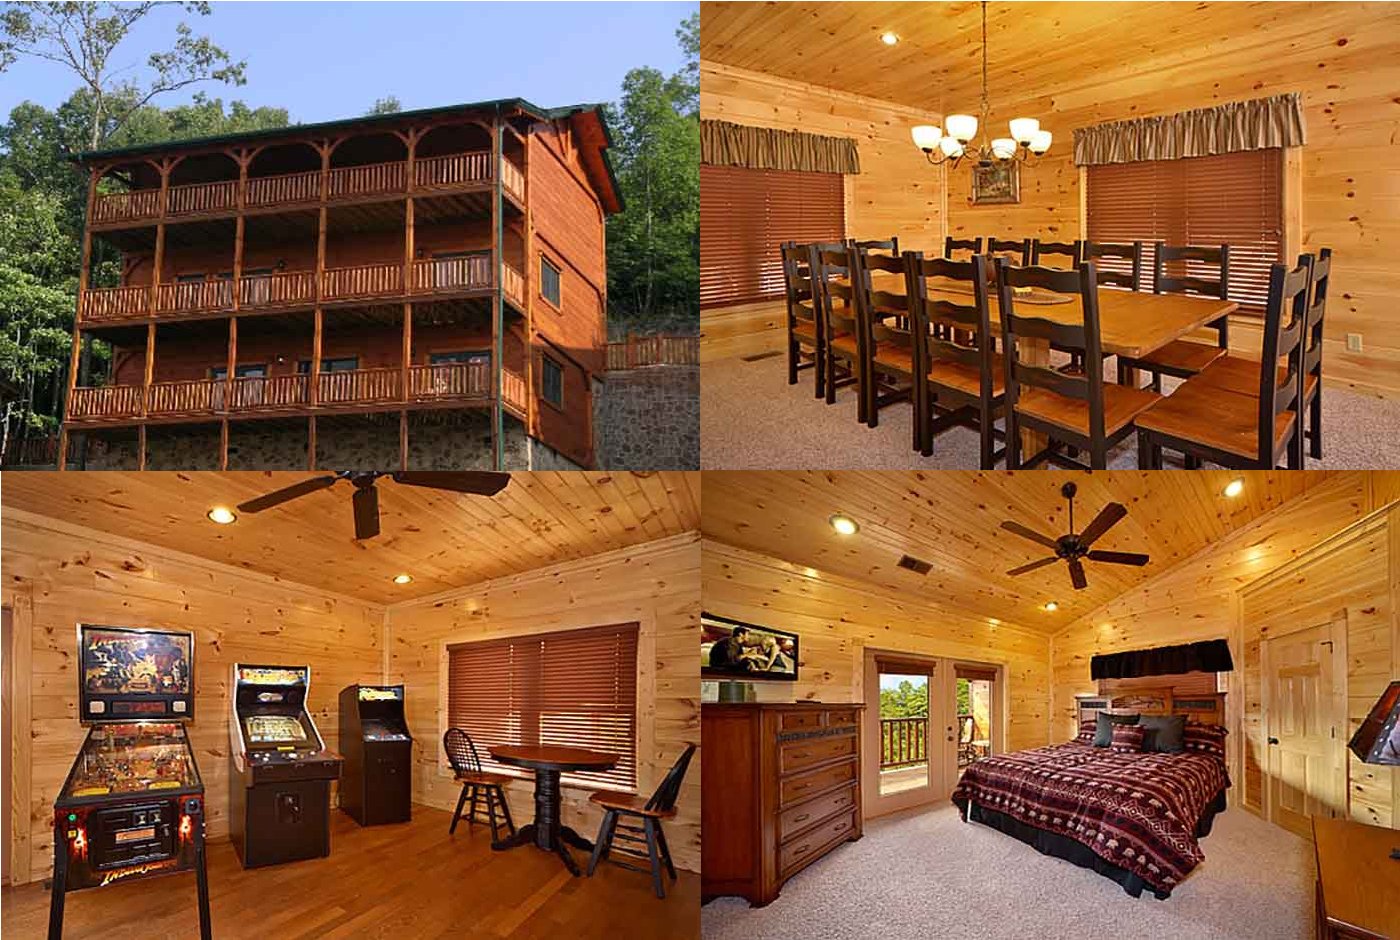 react details heritage Perfect Family Reunion Cabin Vacation in the Smoky Mountains